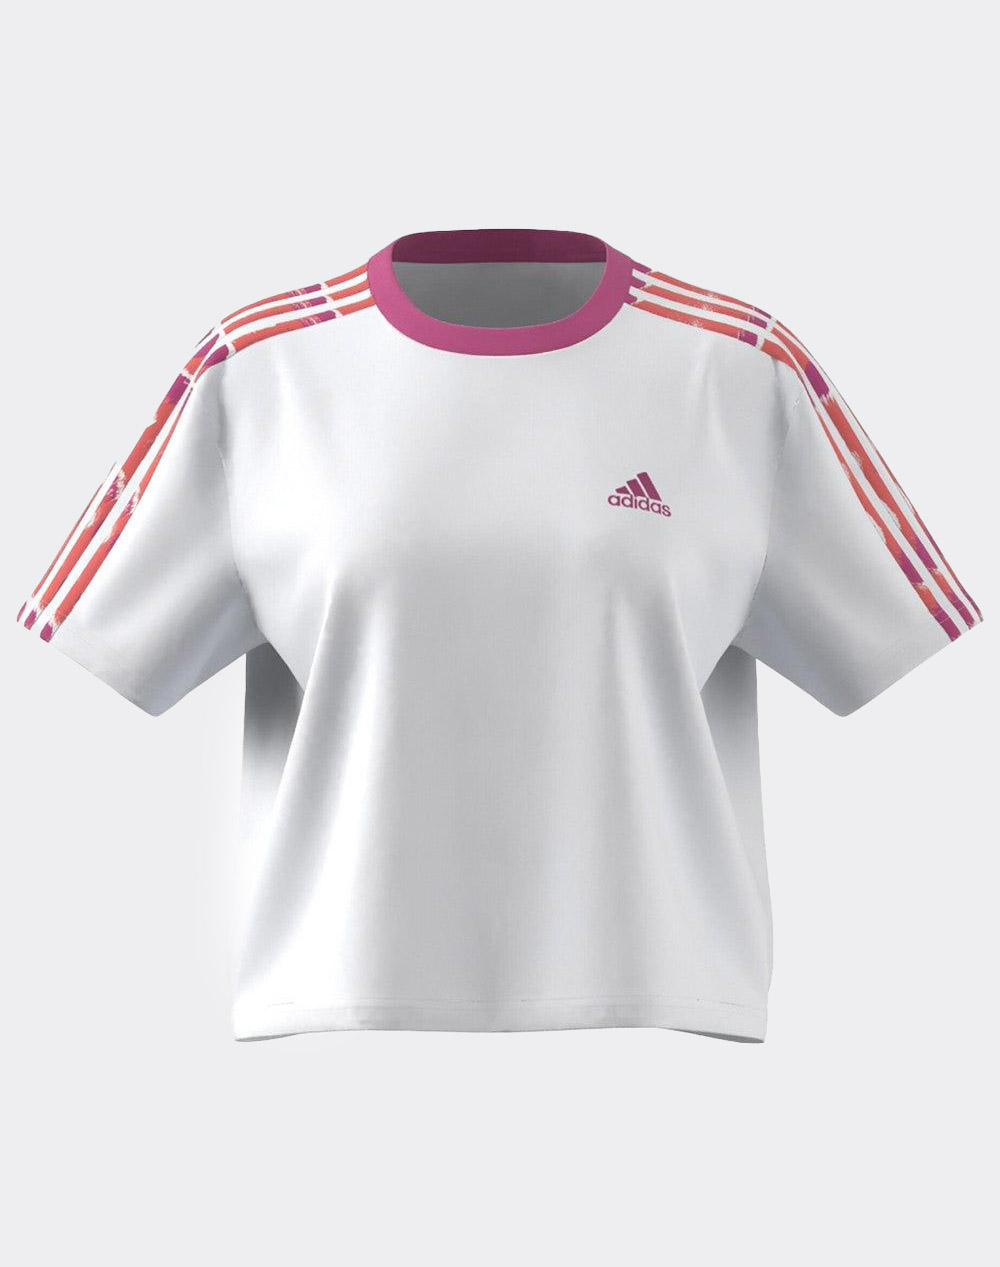 ADIDAS TOP W TOP White - 3S CR